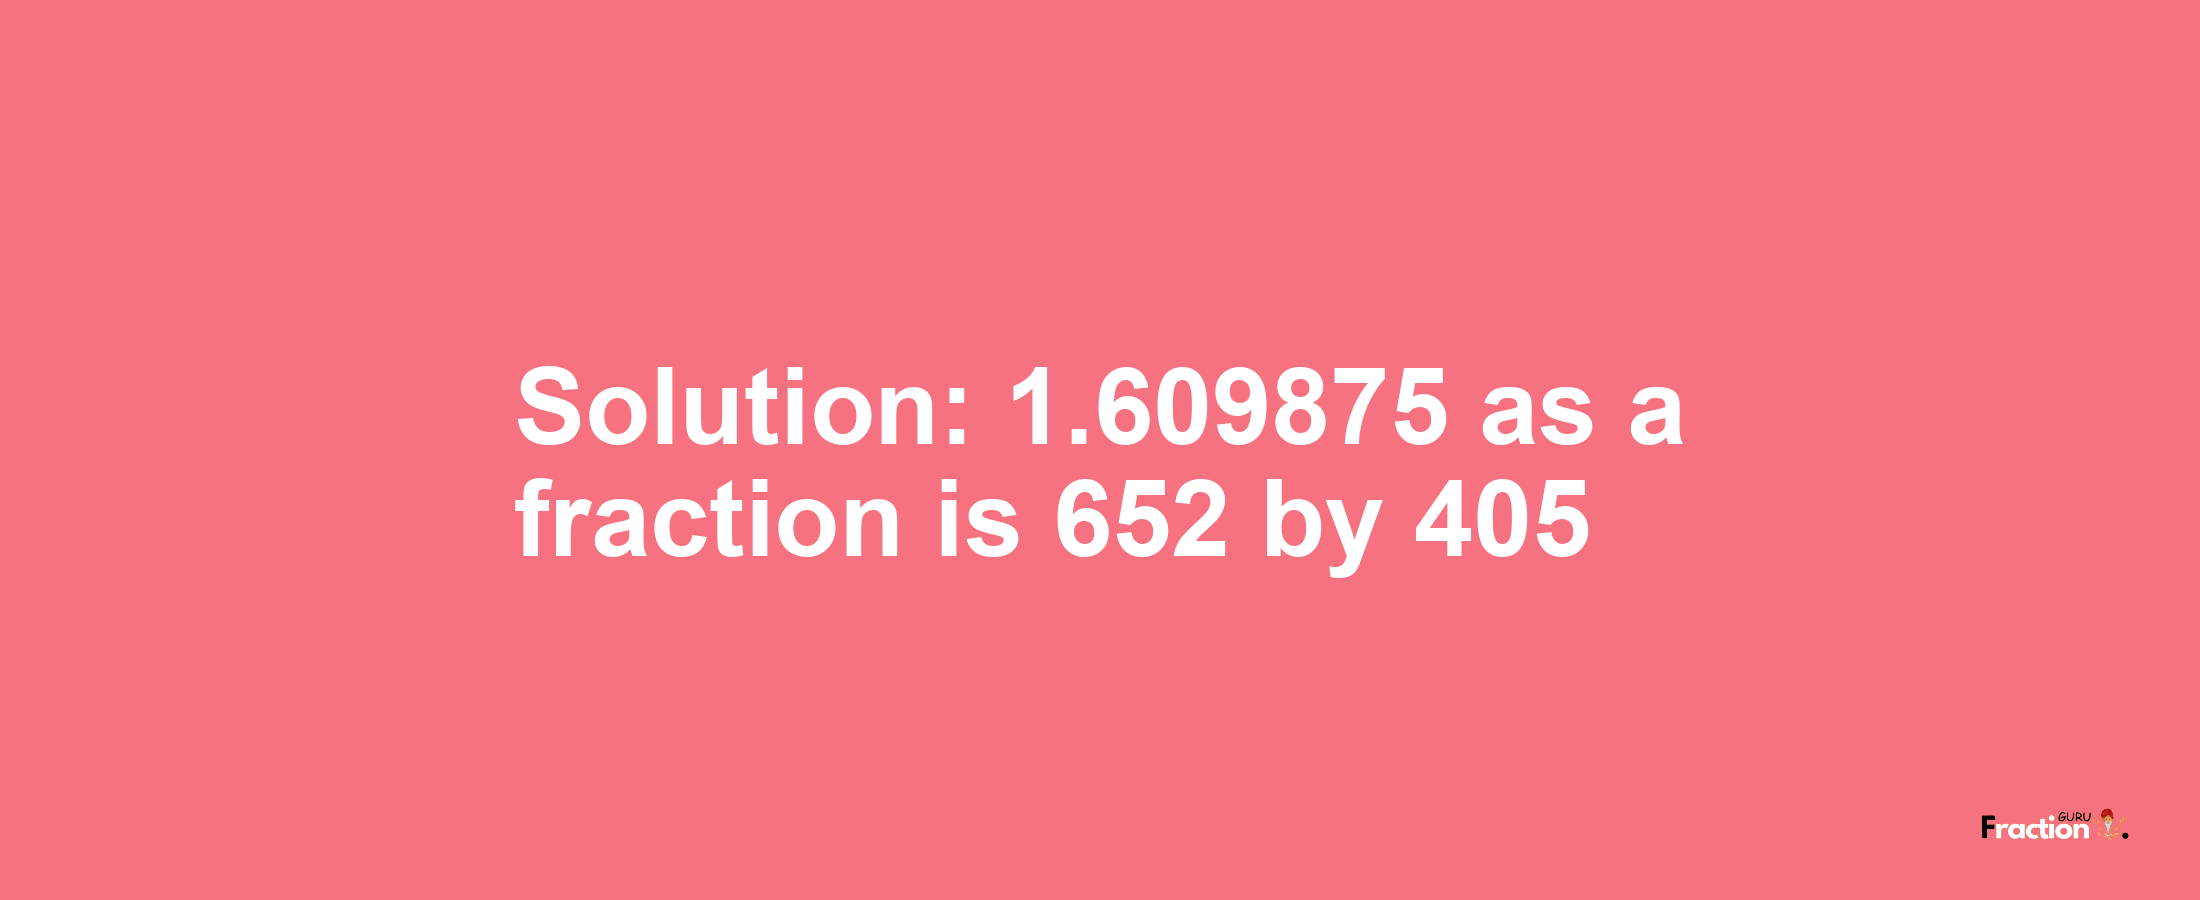 Solution:1.609875 as a fraction is 652/405